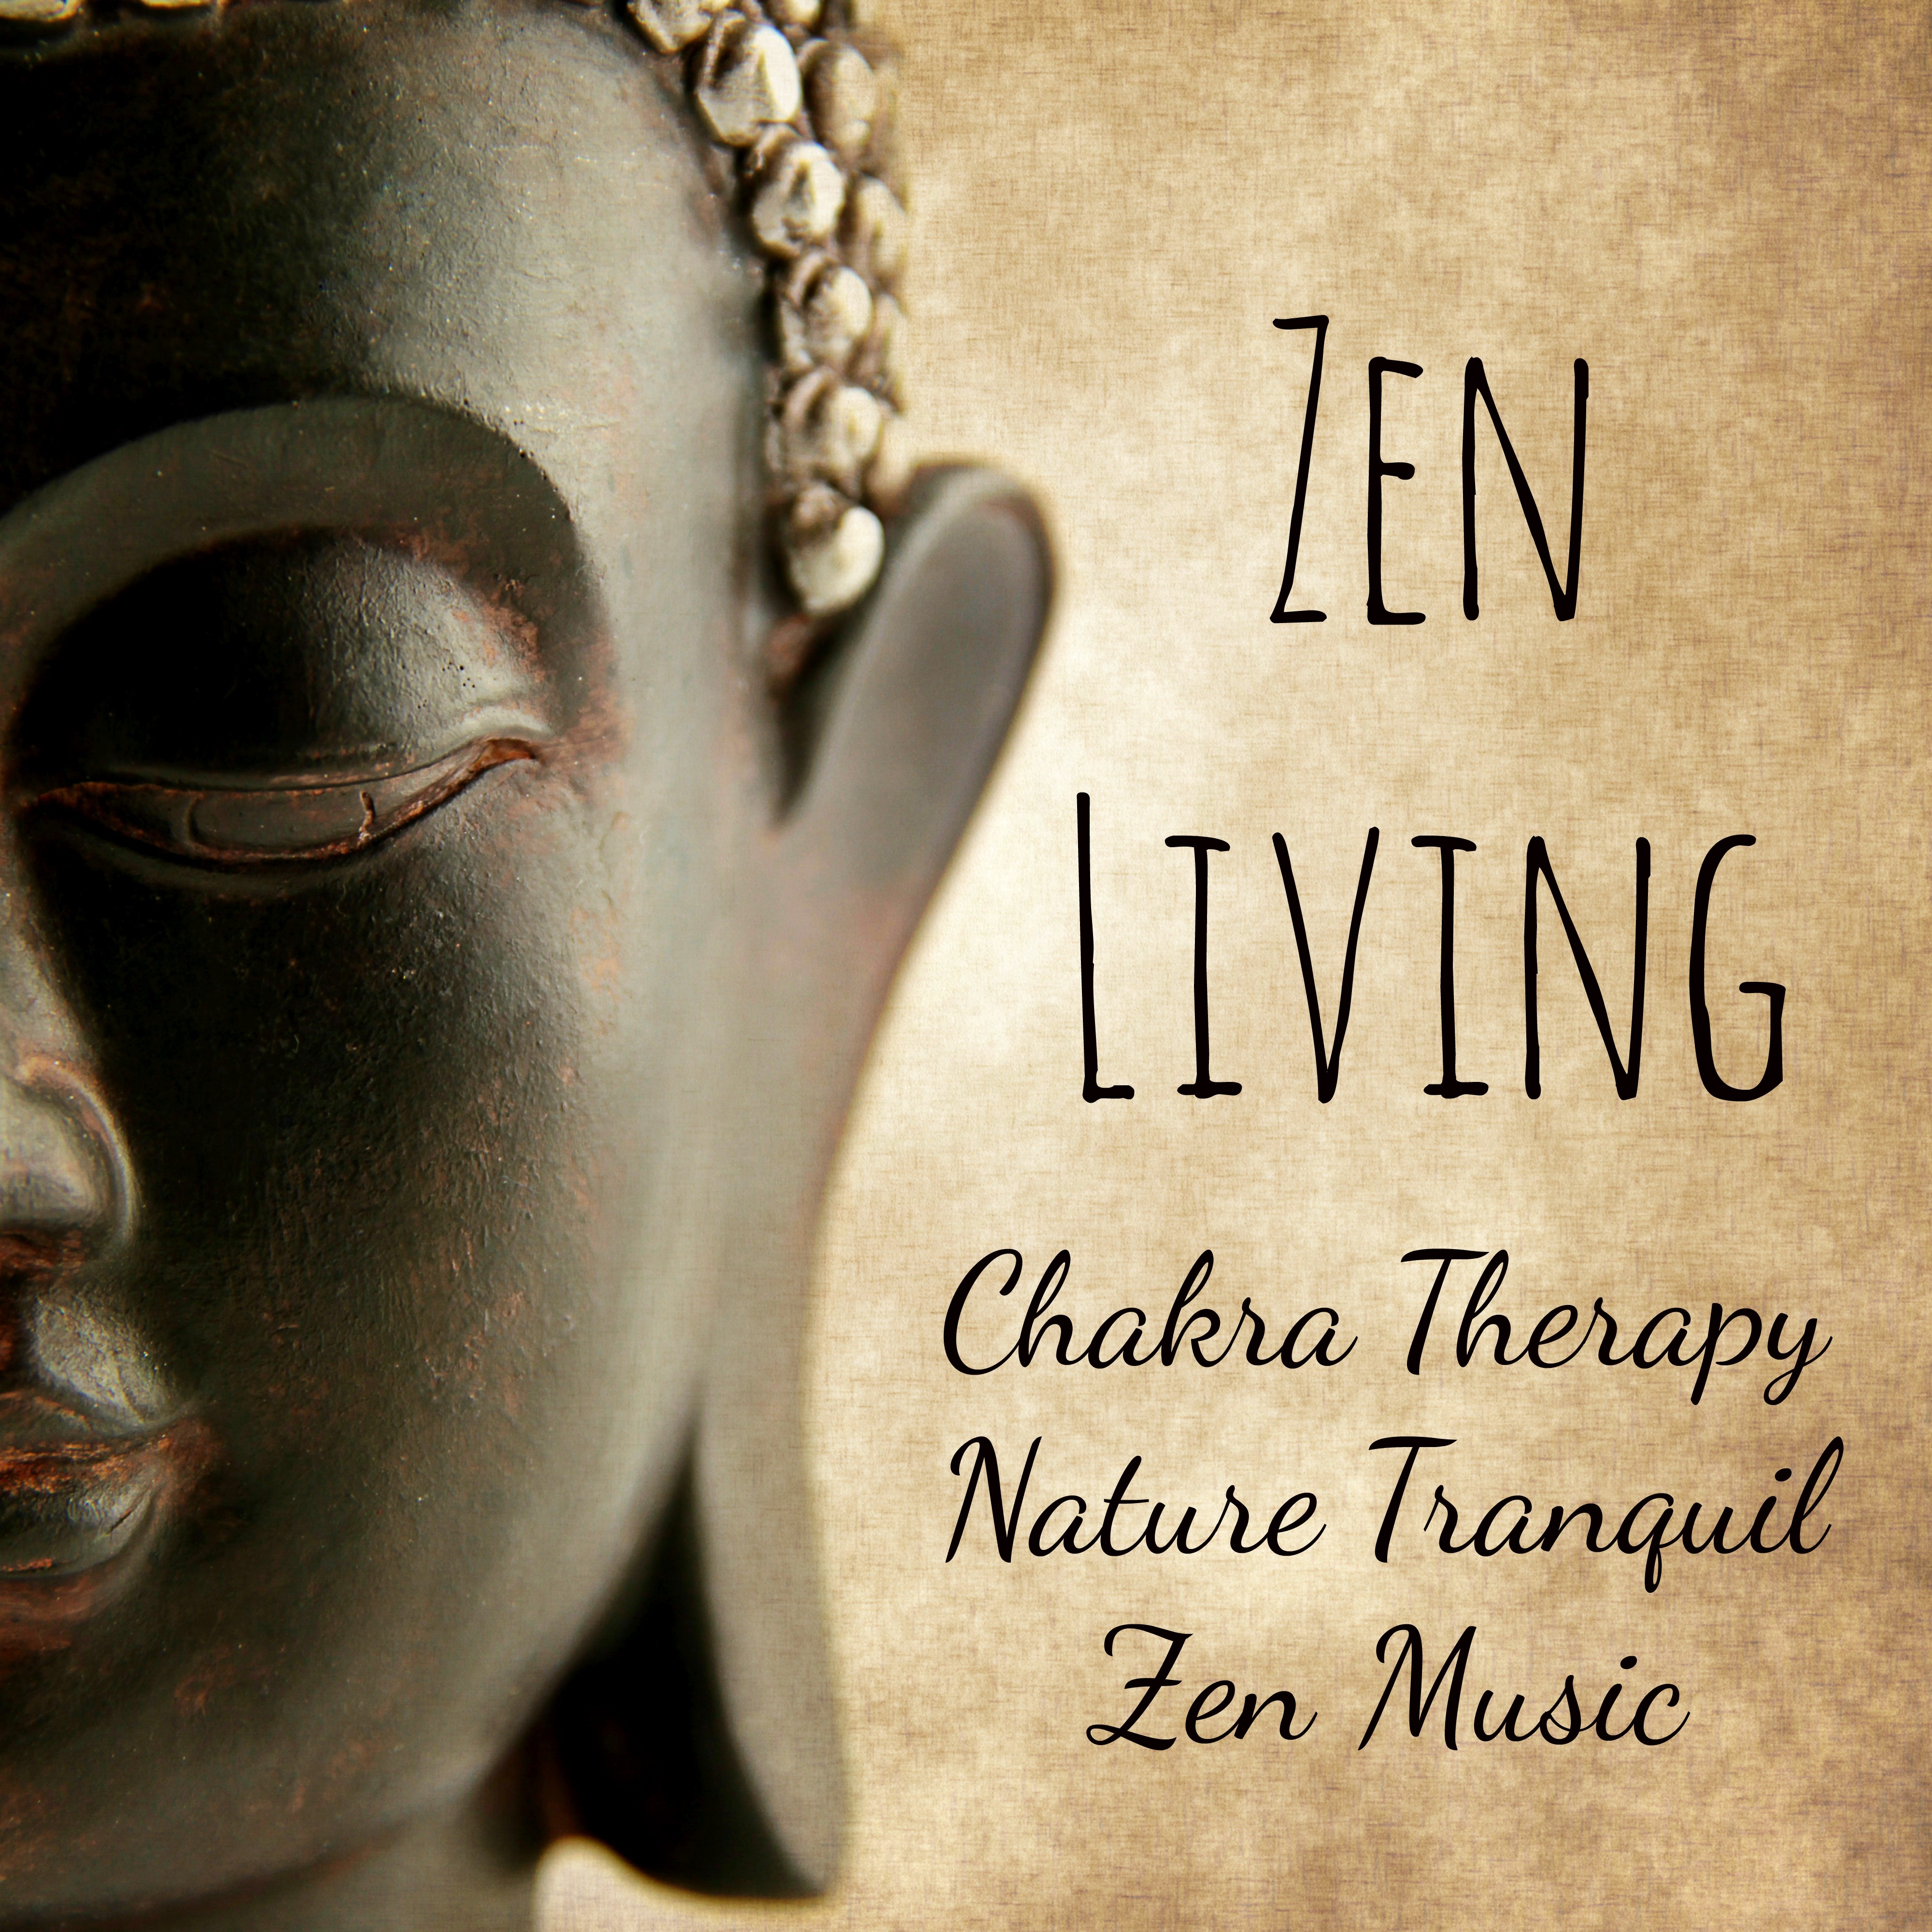 Zen Living - Chakra Therapy Nature Tranquil Zen Music for Personal Space Wellness Day and Mindfulness Meditation